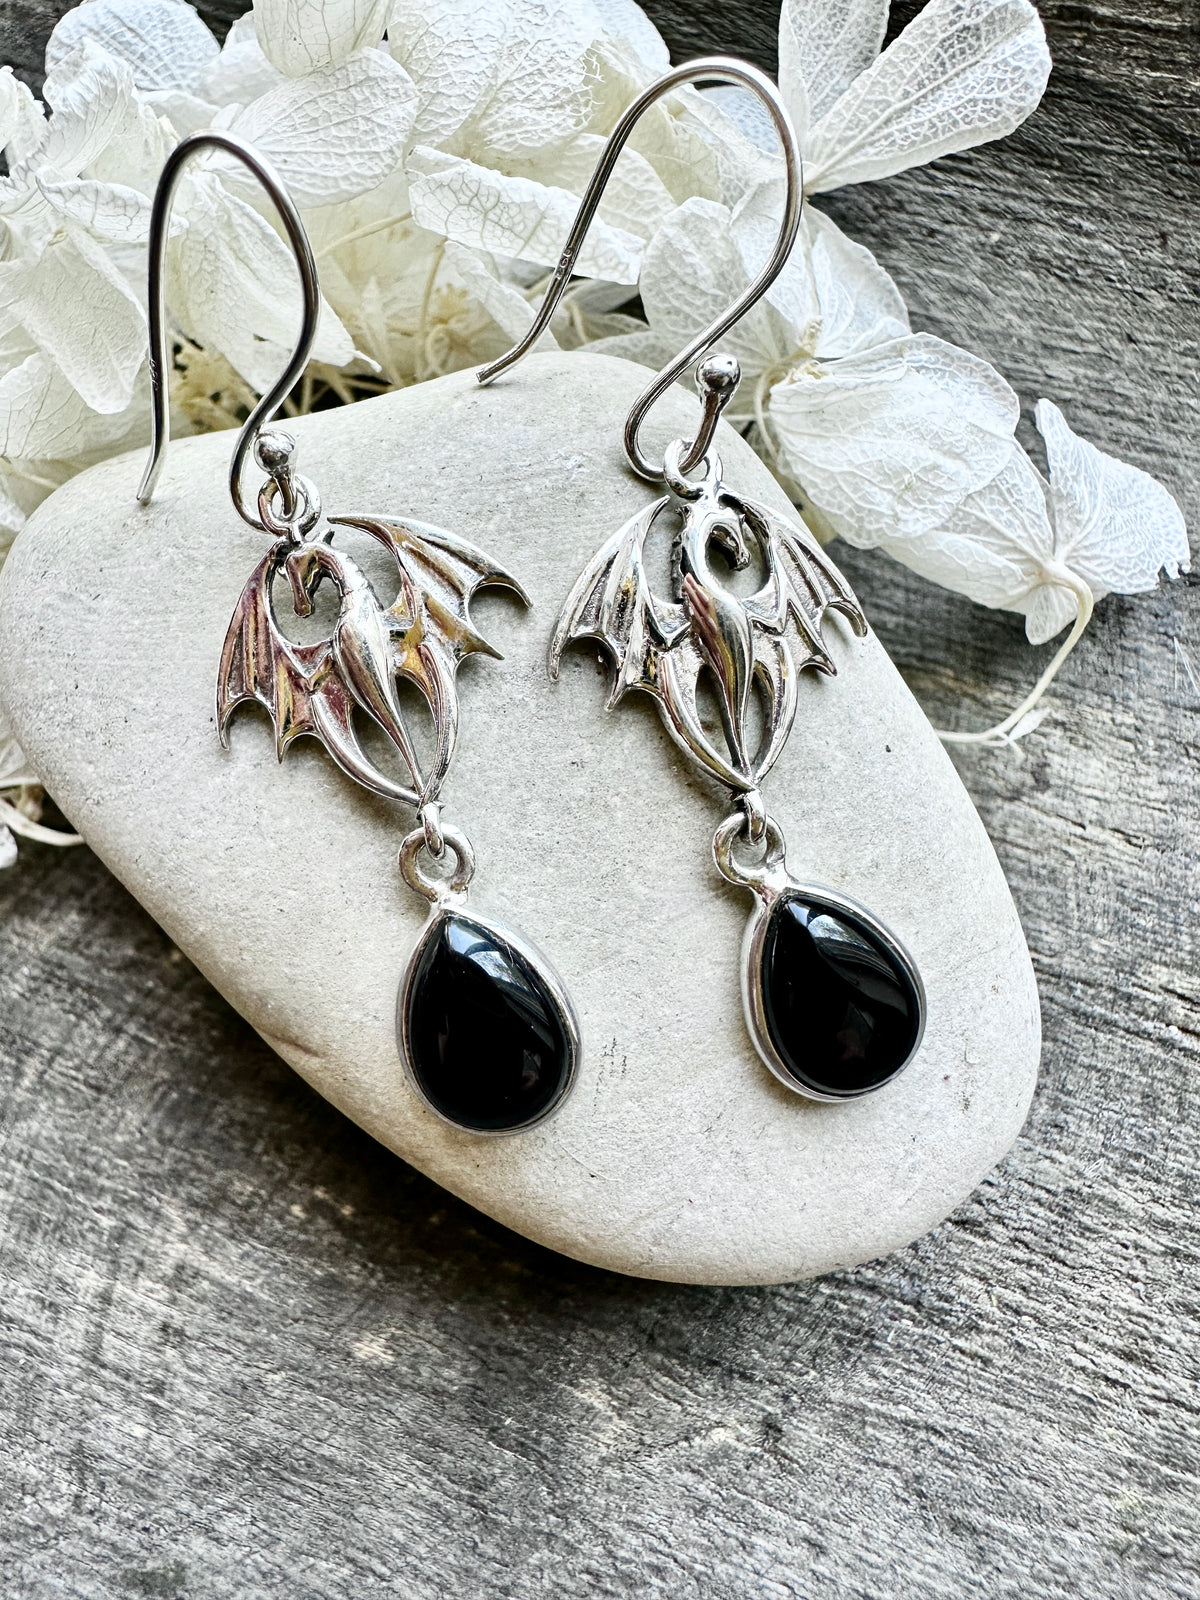 Handmade 925 Silver Dragon Earrings with Crystal Moonstone, Black Onyx Jade, and Amethyst: Mythical Elegance and Elemental Energy